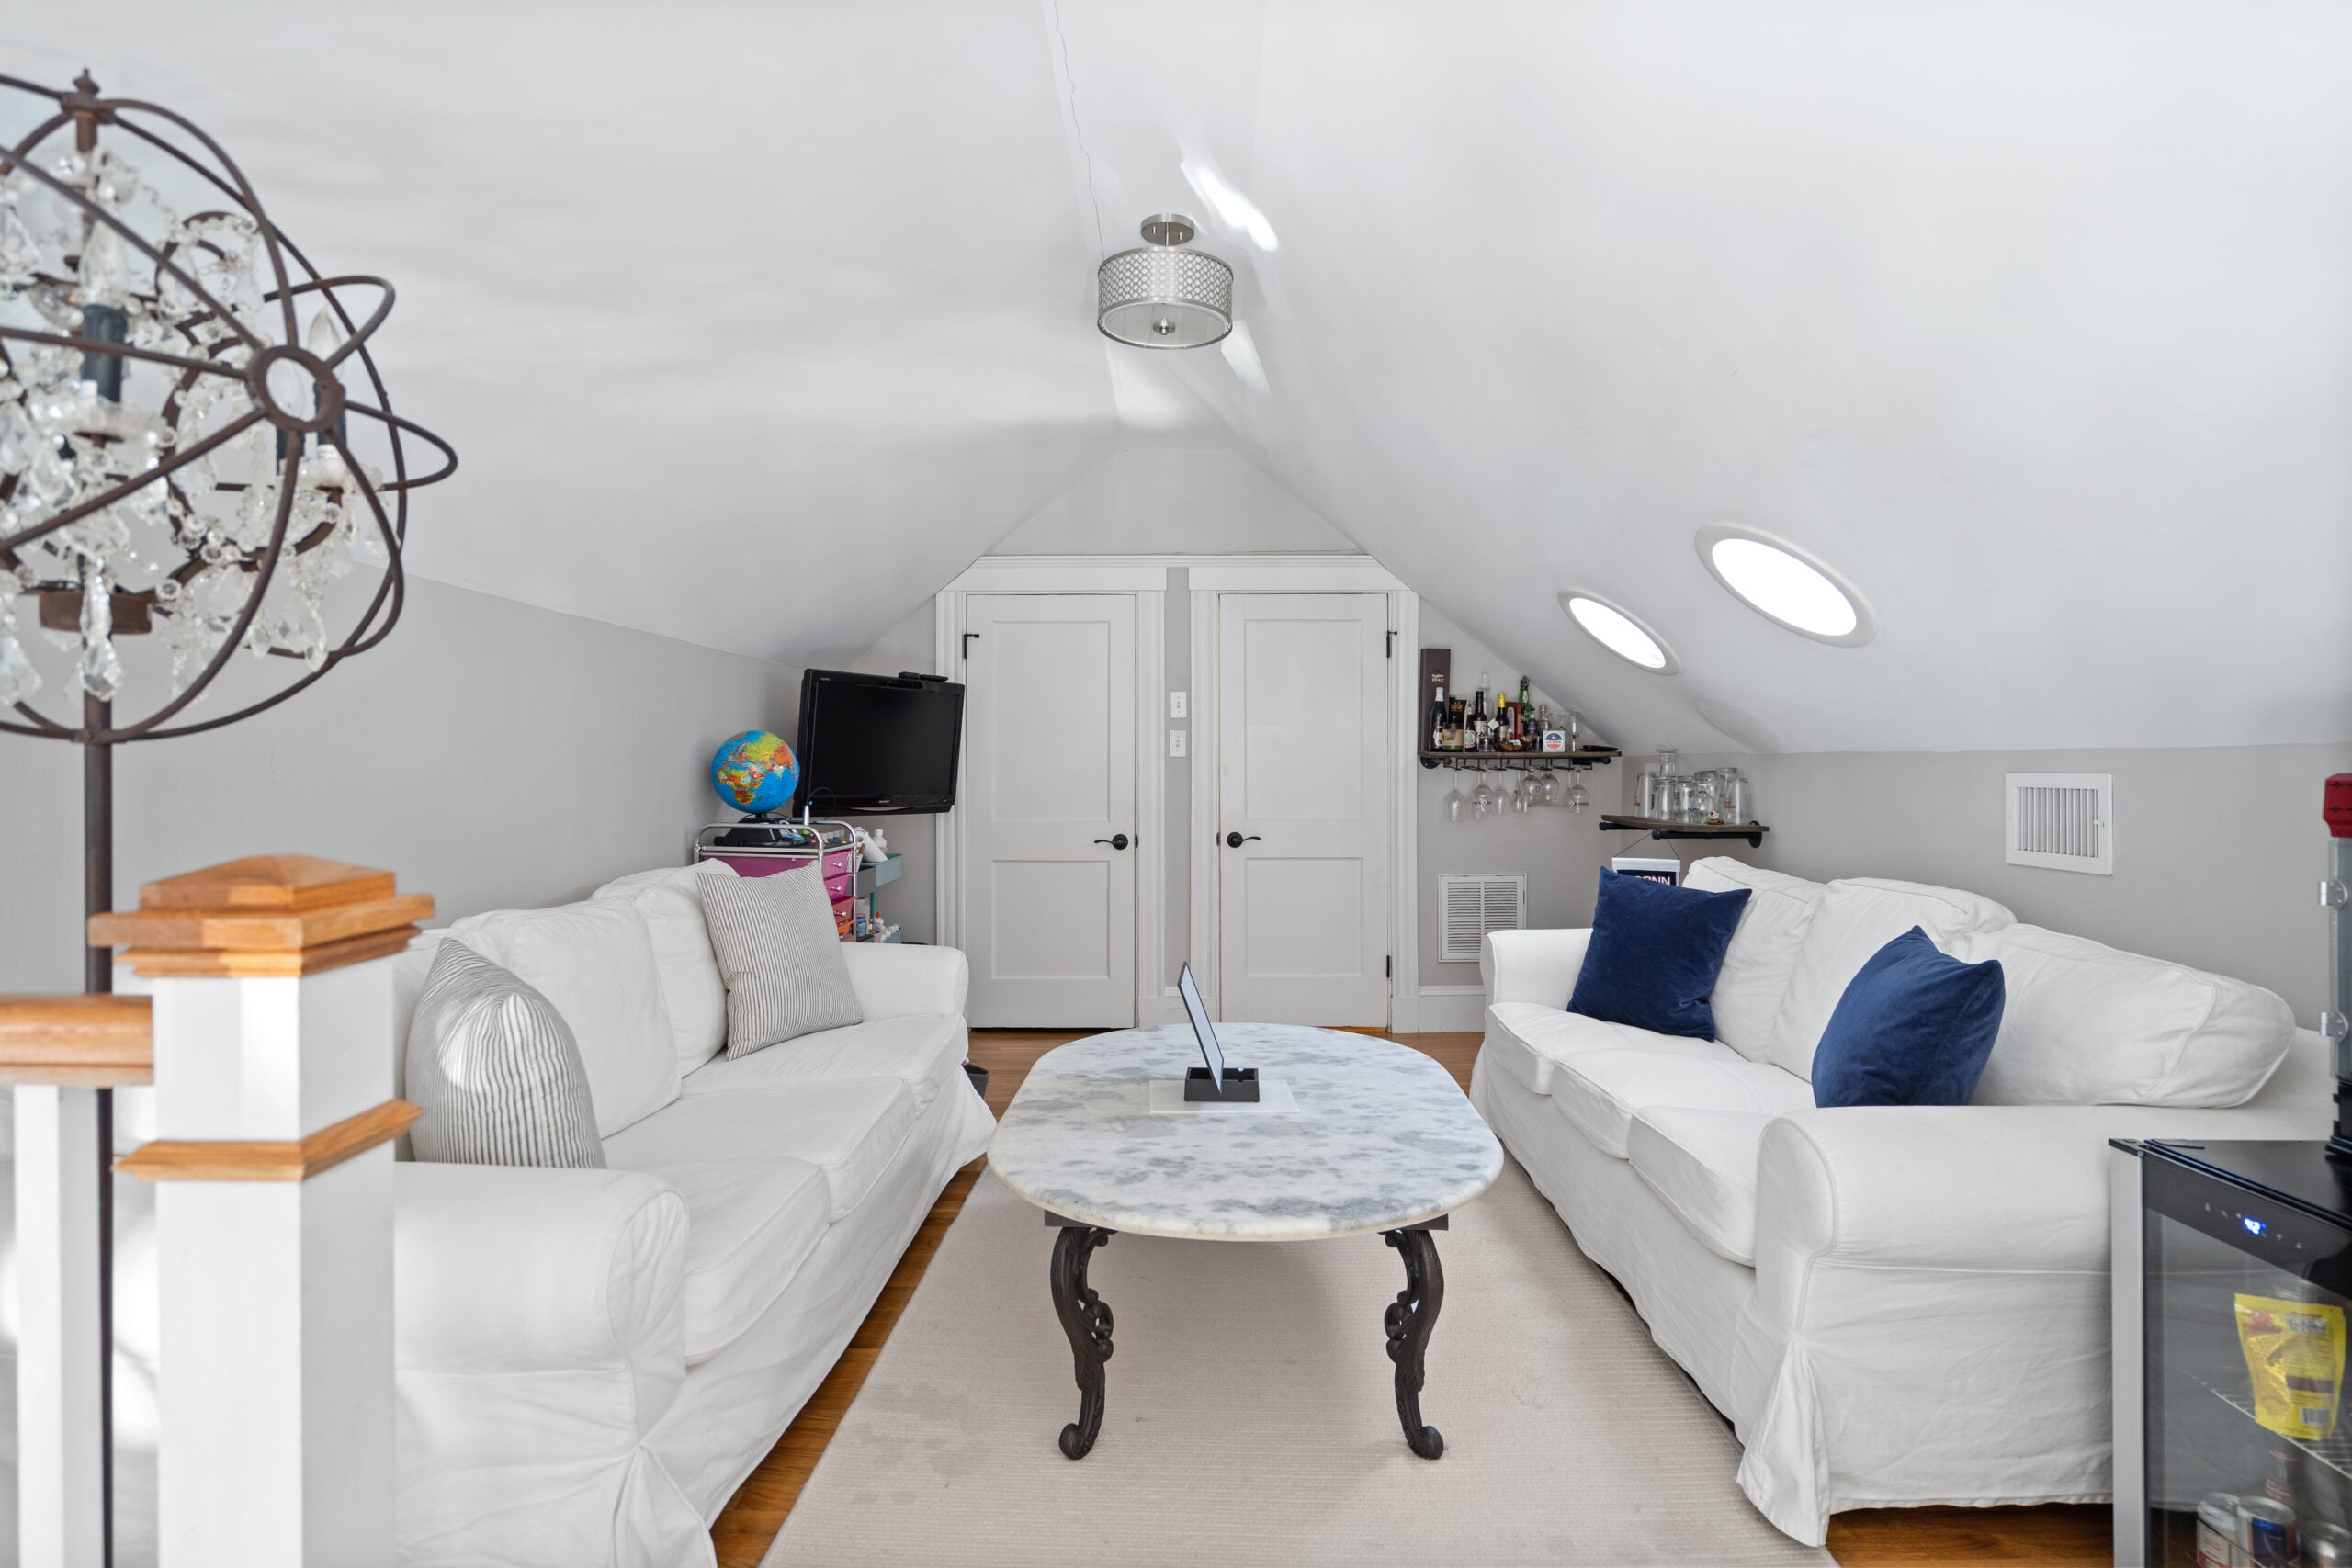 A loft area with a pair of white couches that flank an overall coffee table with a marble top. The room has recessed lights, wood flooring, a gray area rug, and blue and gray throw pillows. There are two doors at the back of the room.